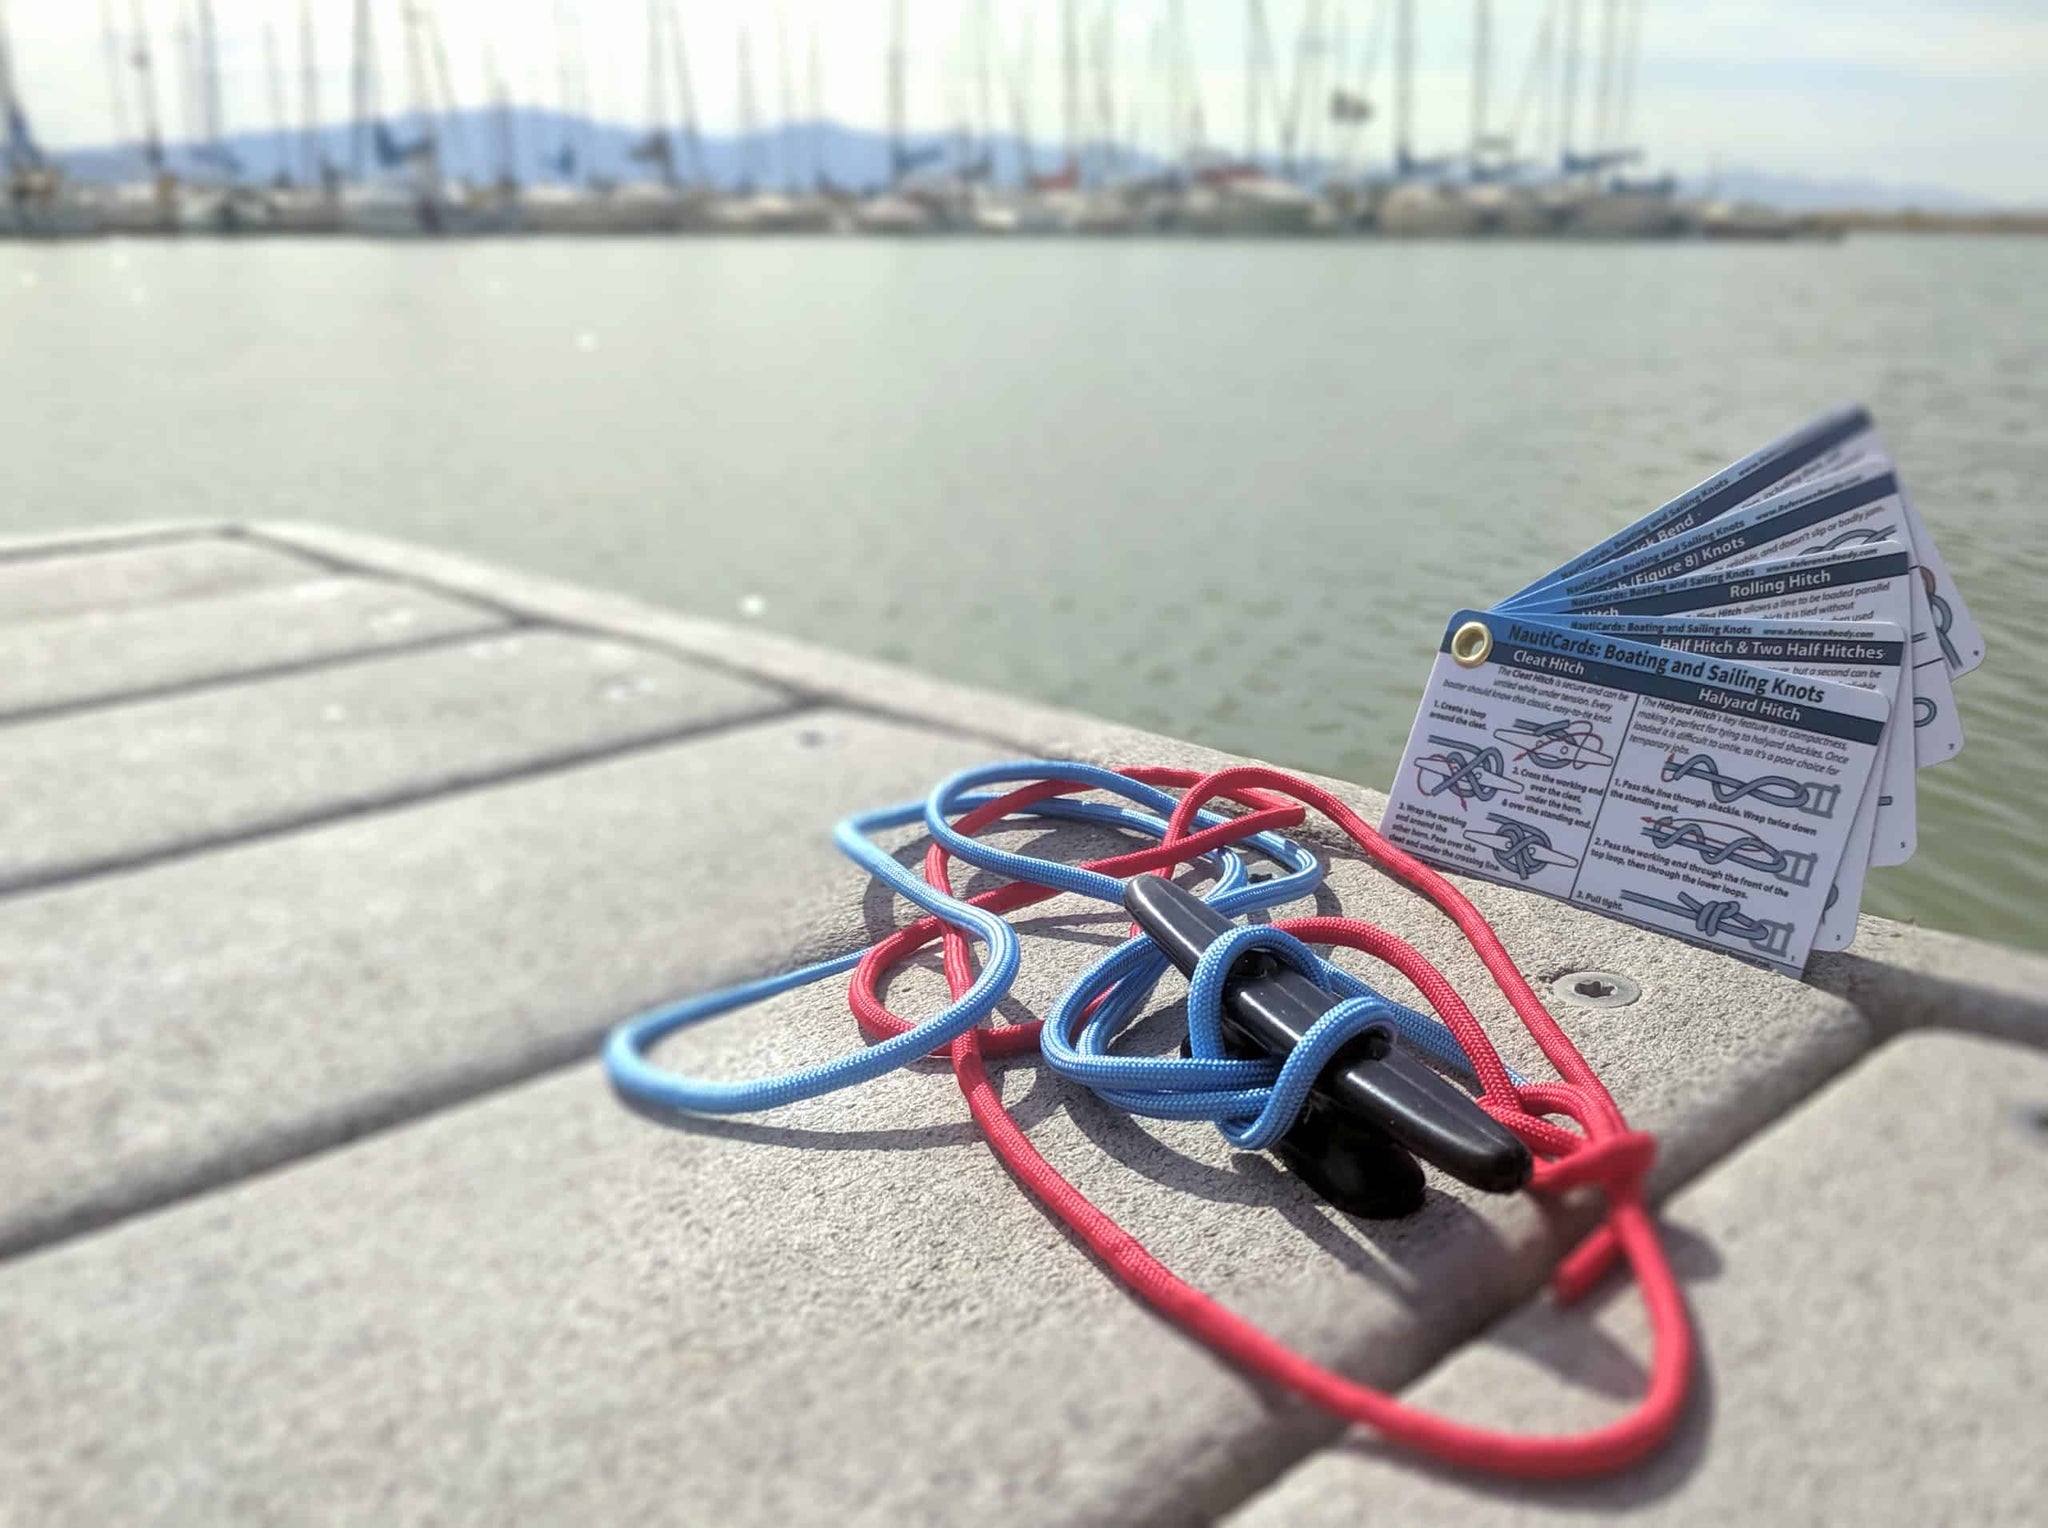  ReferenceReady Nautical Knot Tying Kit for Boaters